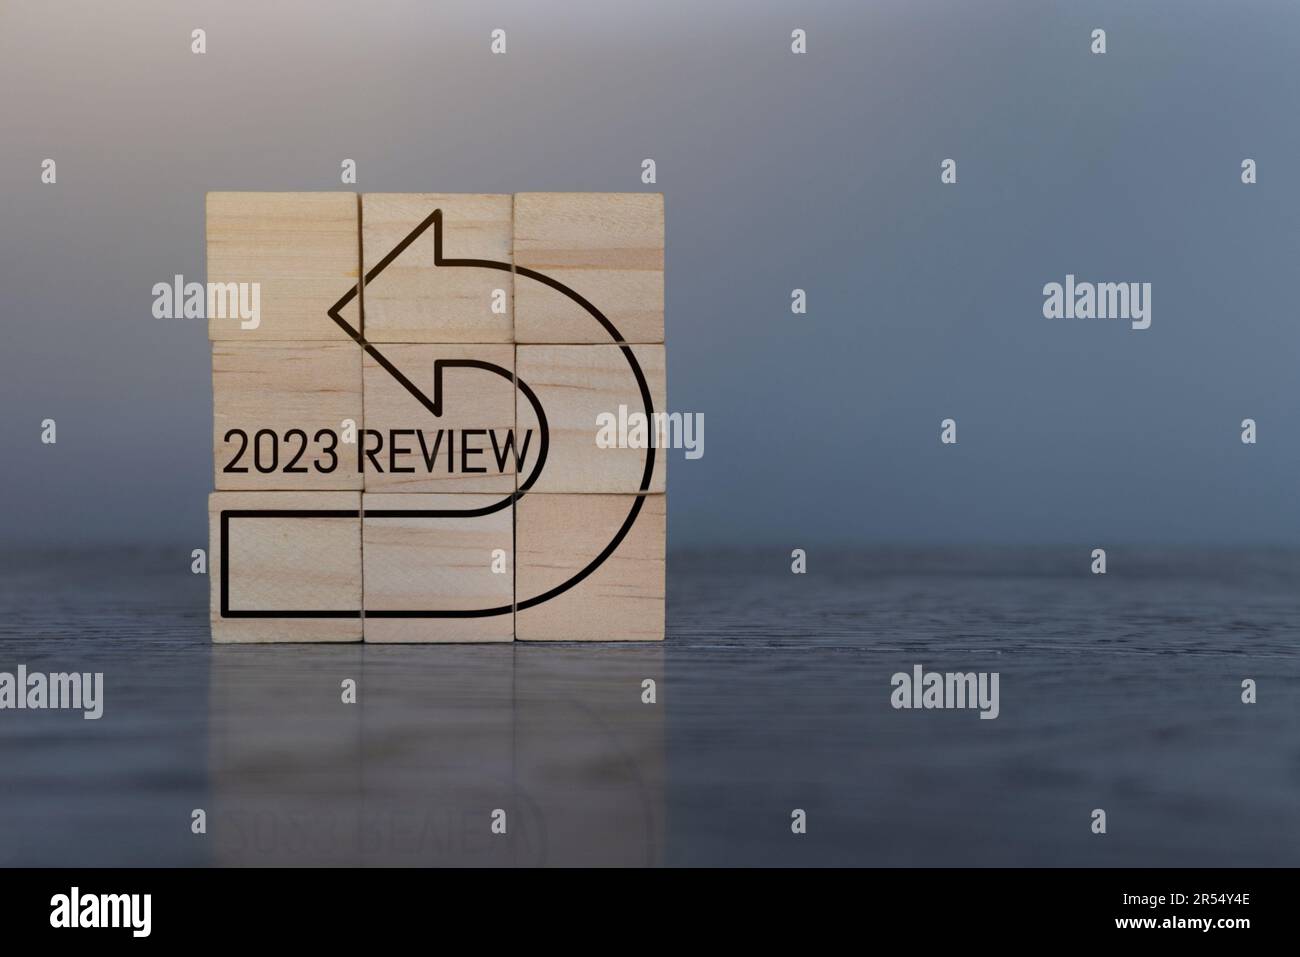 Wooden cubes with text 2023 REVIEW. Copy space for text. Annual review, evaluation and audit concept Stock Photo